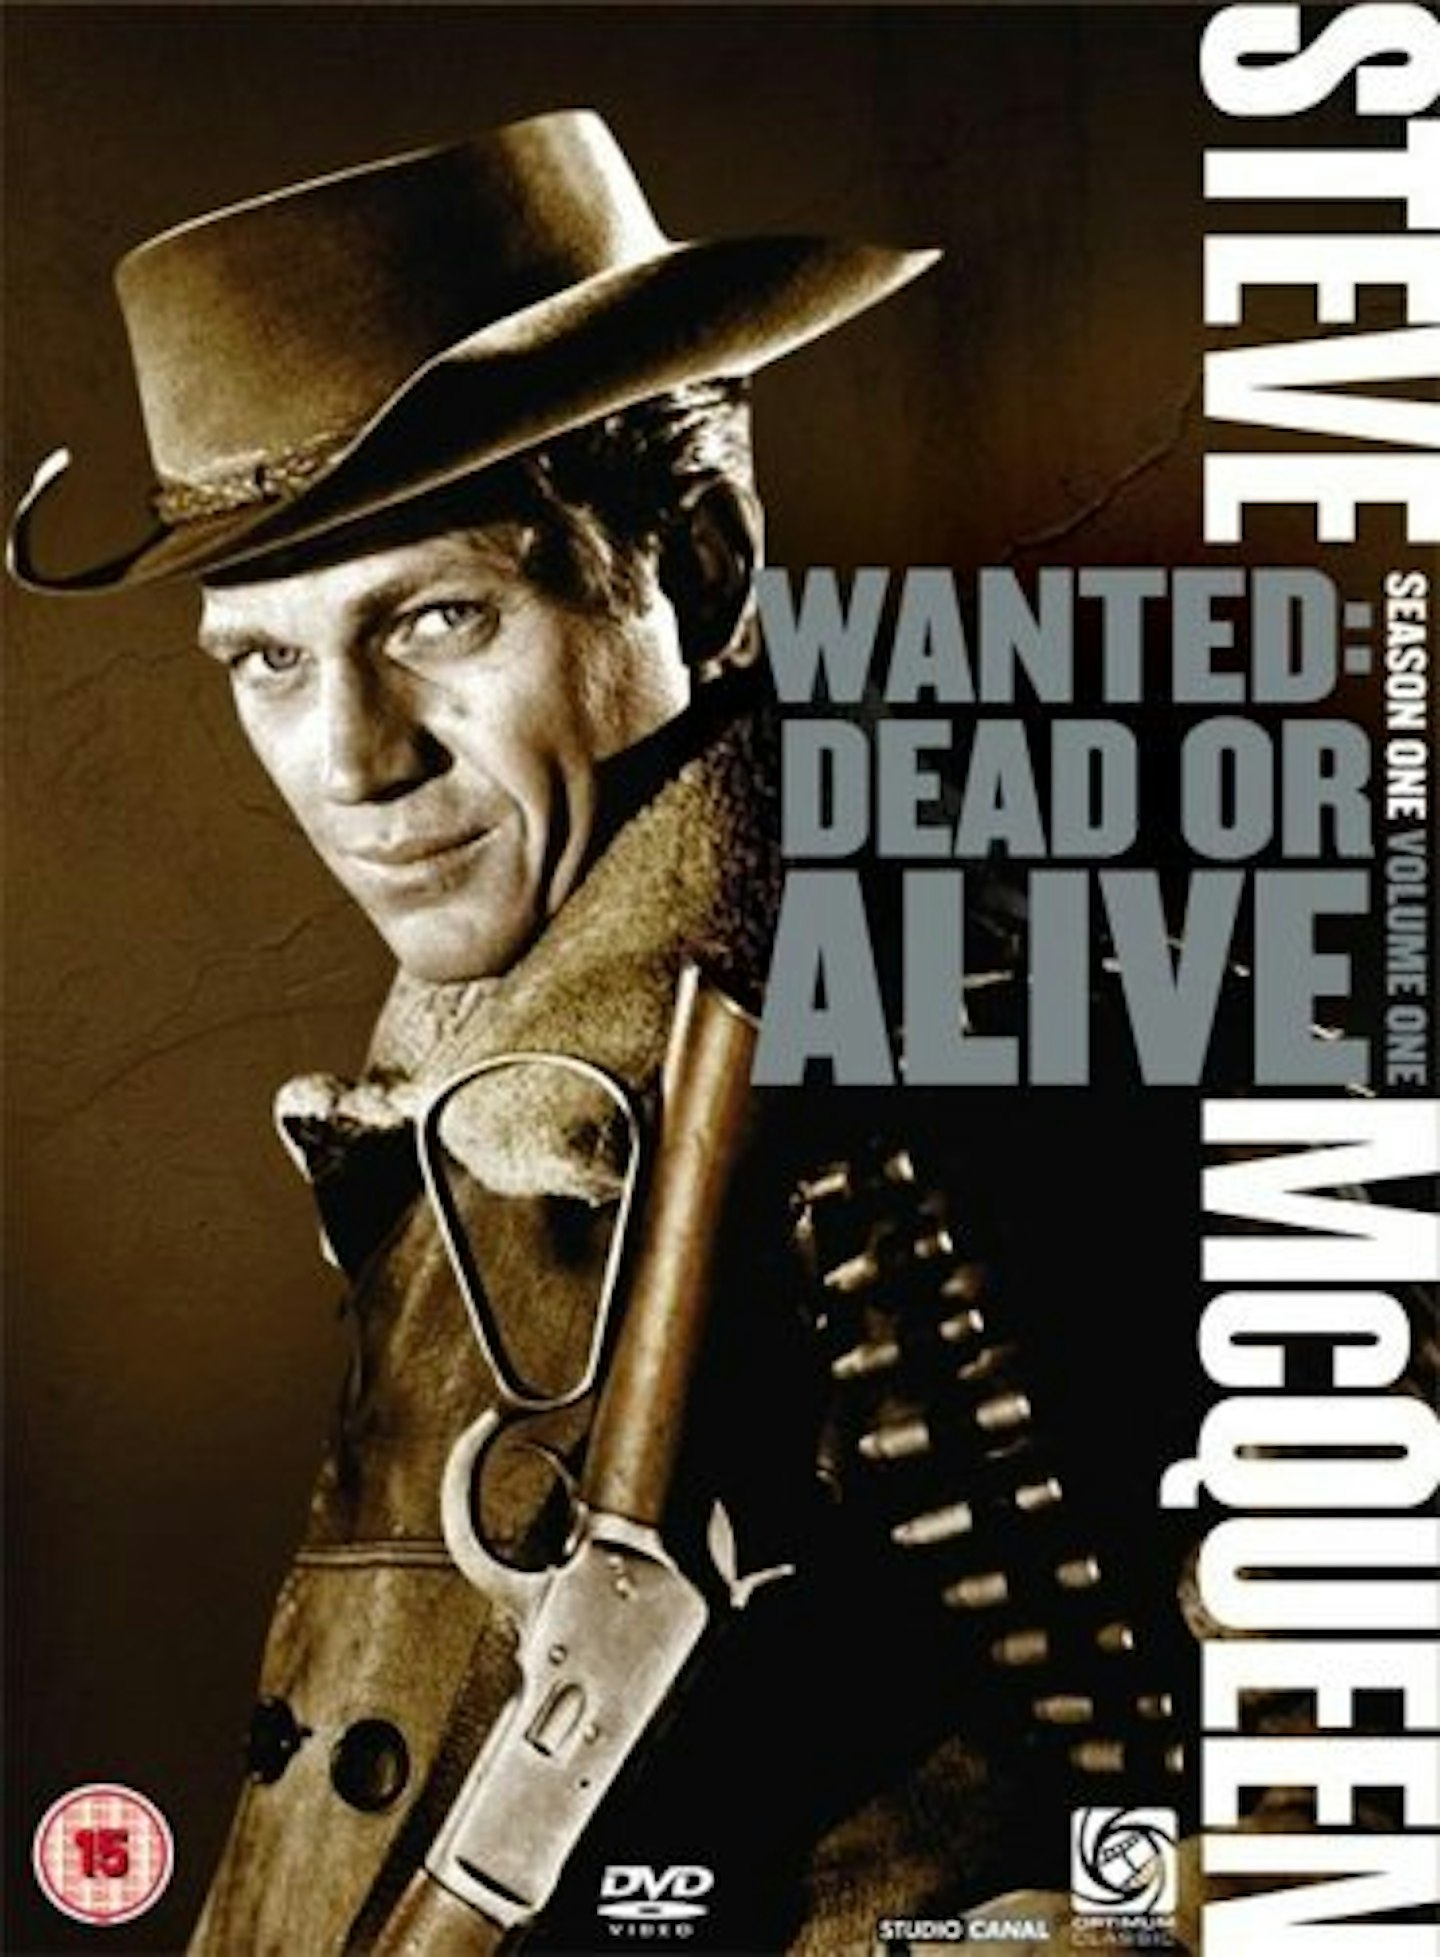 Wanted Dead Or Alive Series 1 - Volume 1, £13.00